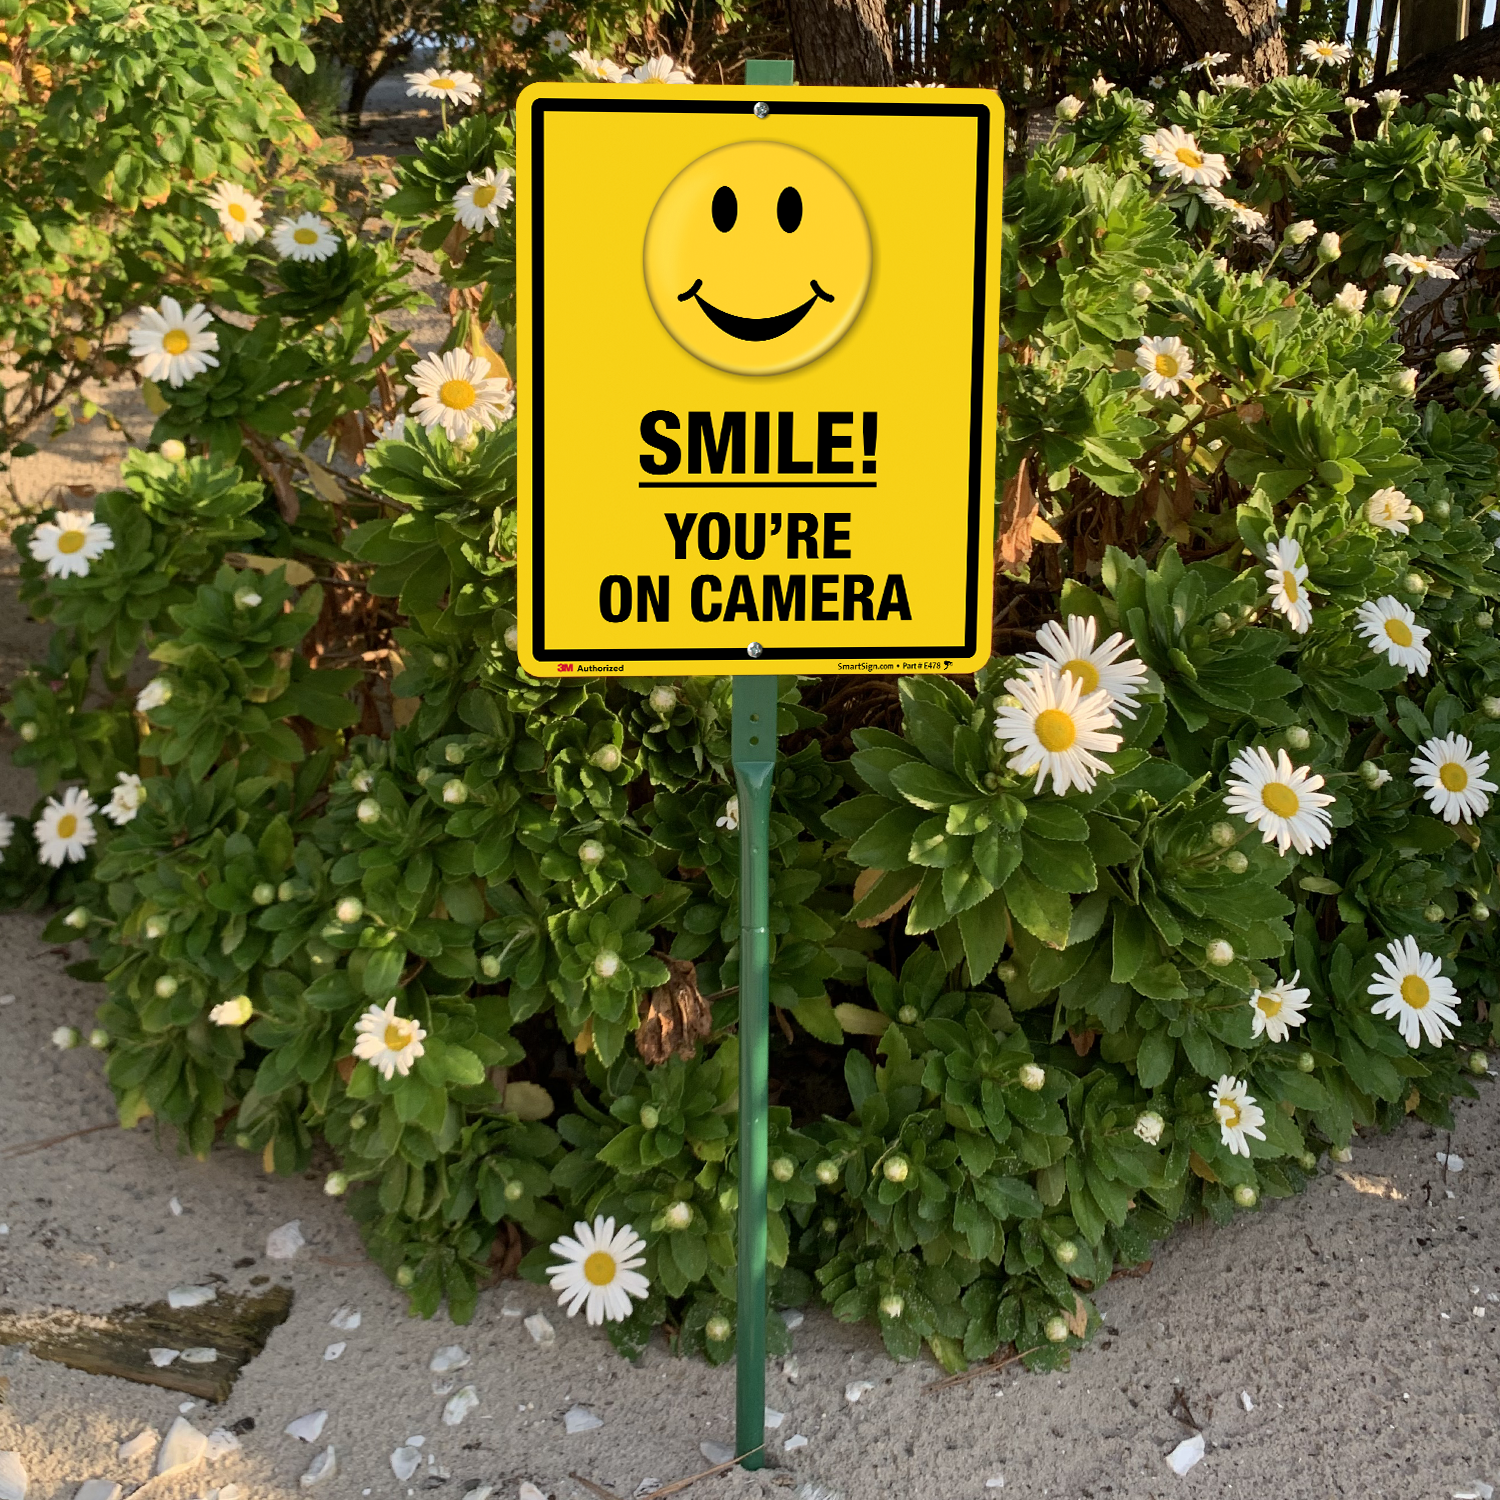 3 SMILE YOU'RE ON CAMERA Coroplast  YARD SIGNS 8x12  w/ Stakes  NEW Security Whi